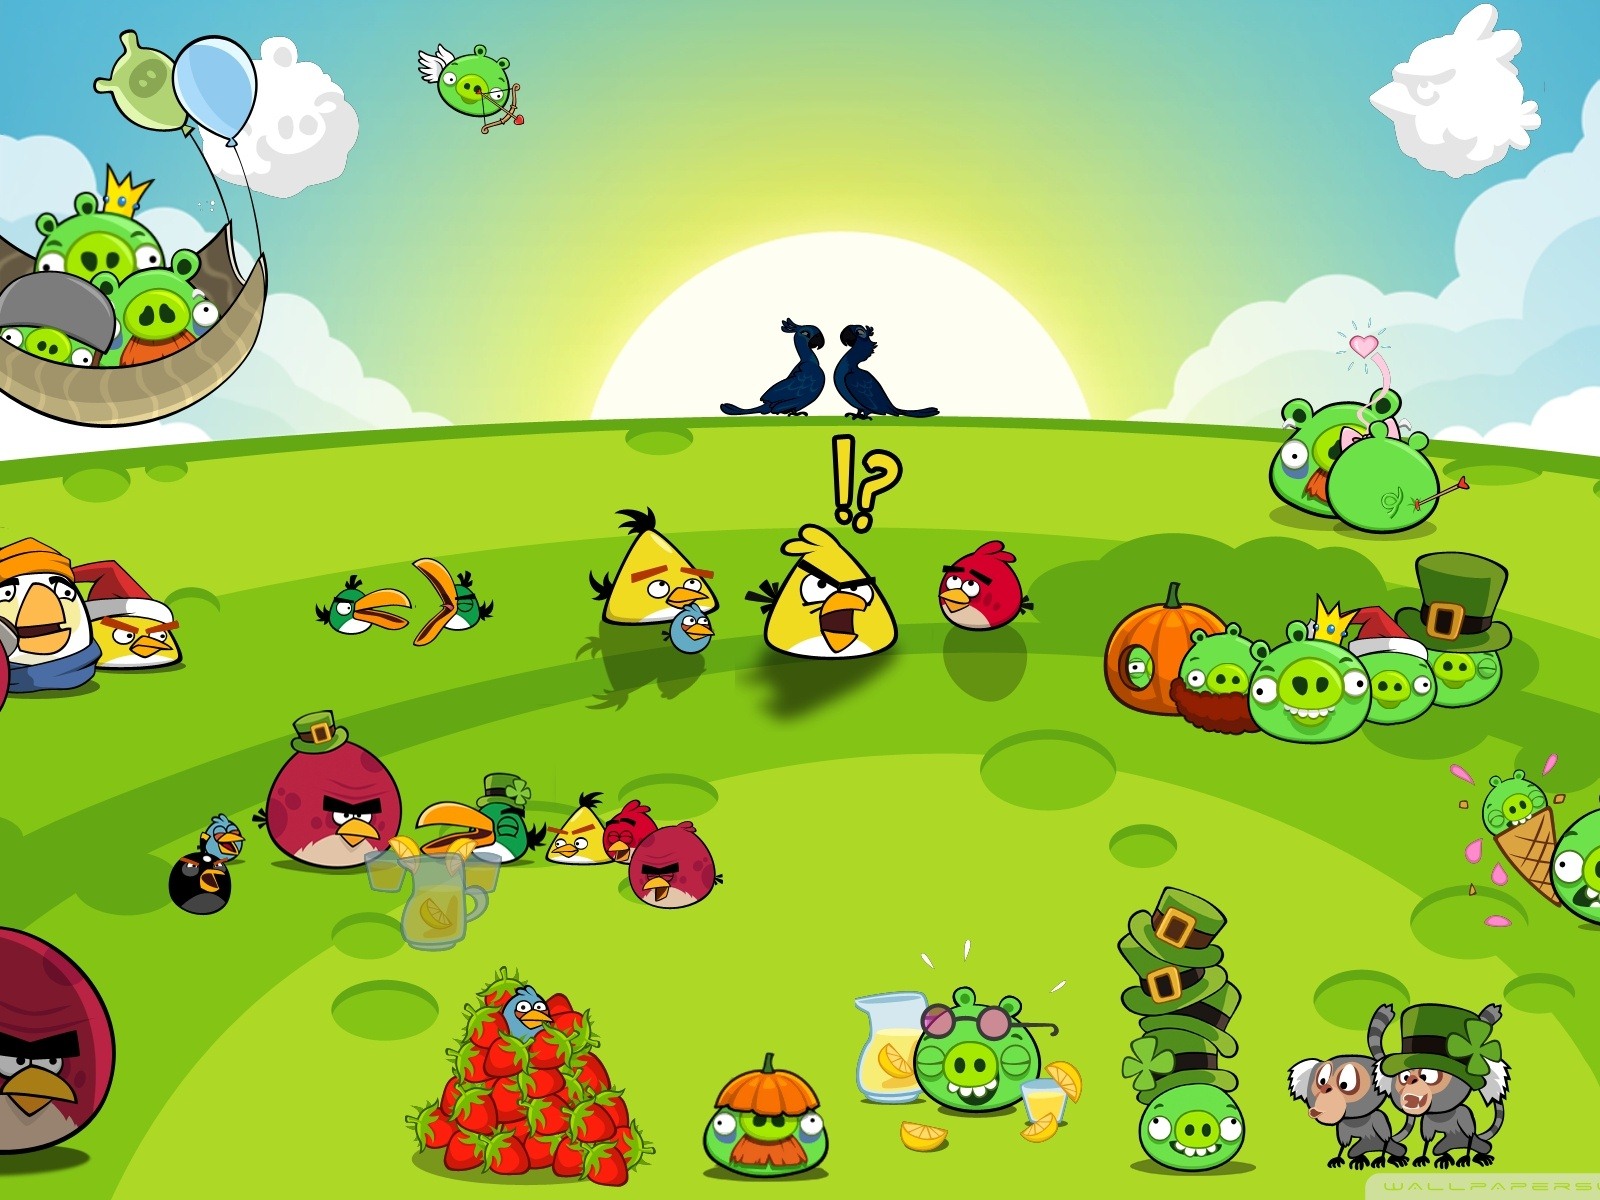 Angry Birds Spiel wallpapers #11 - 1600x1200